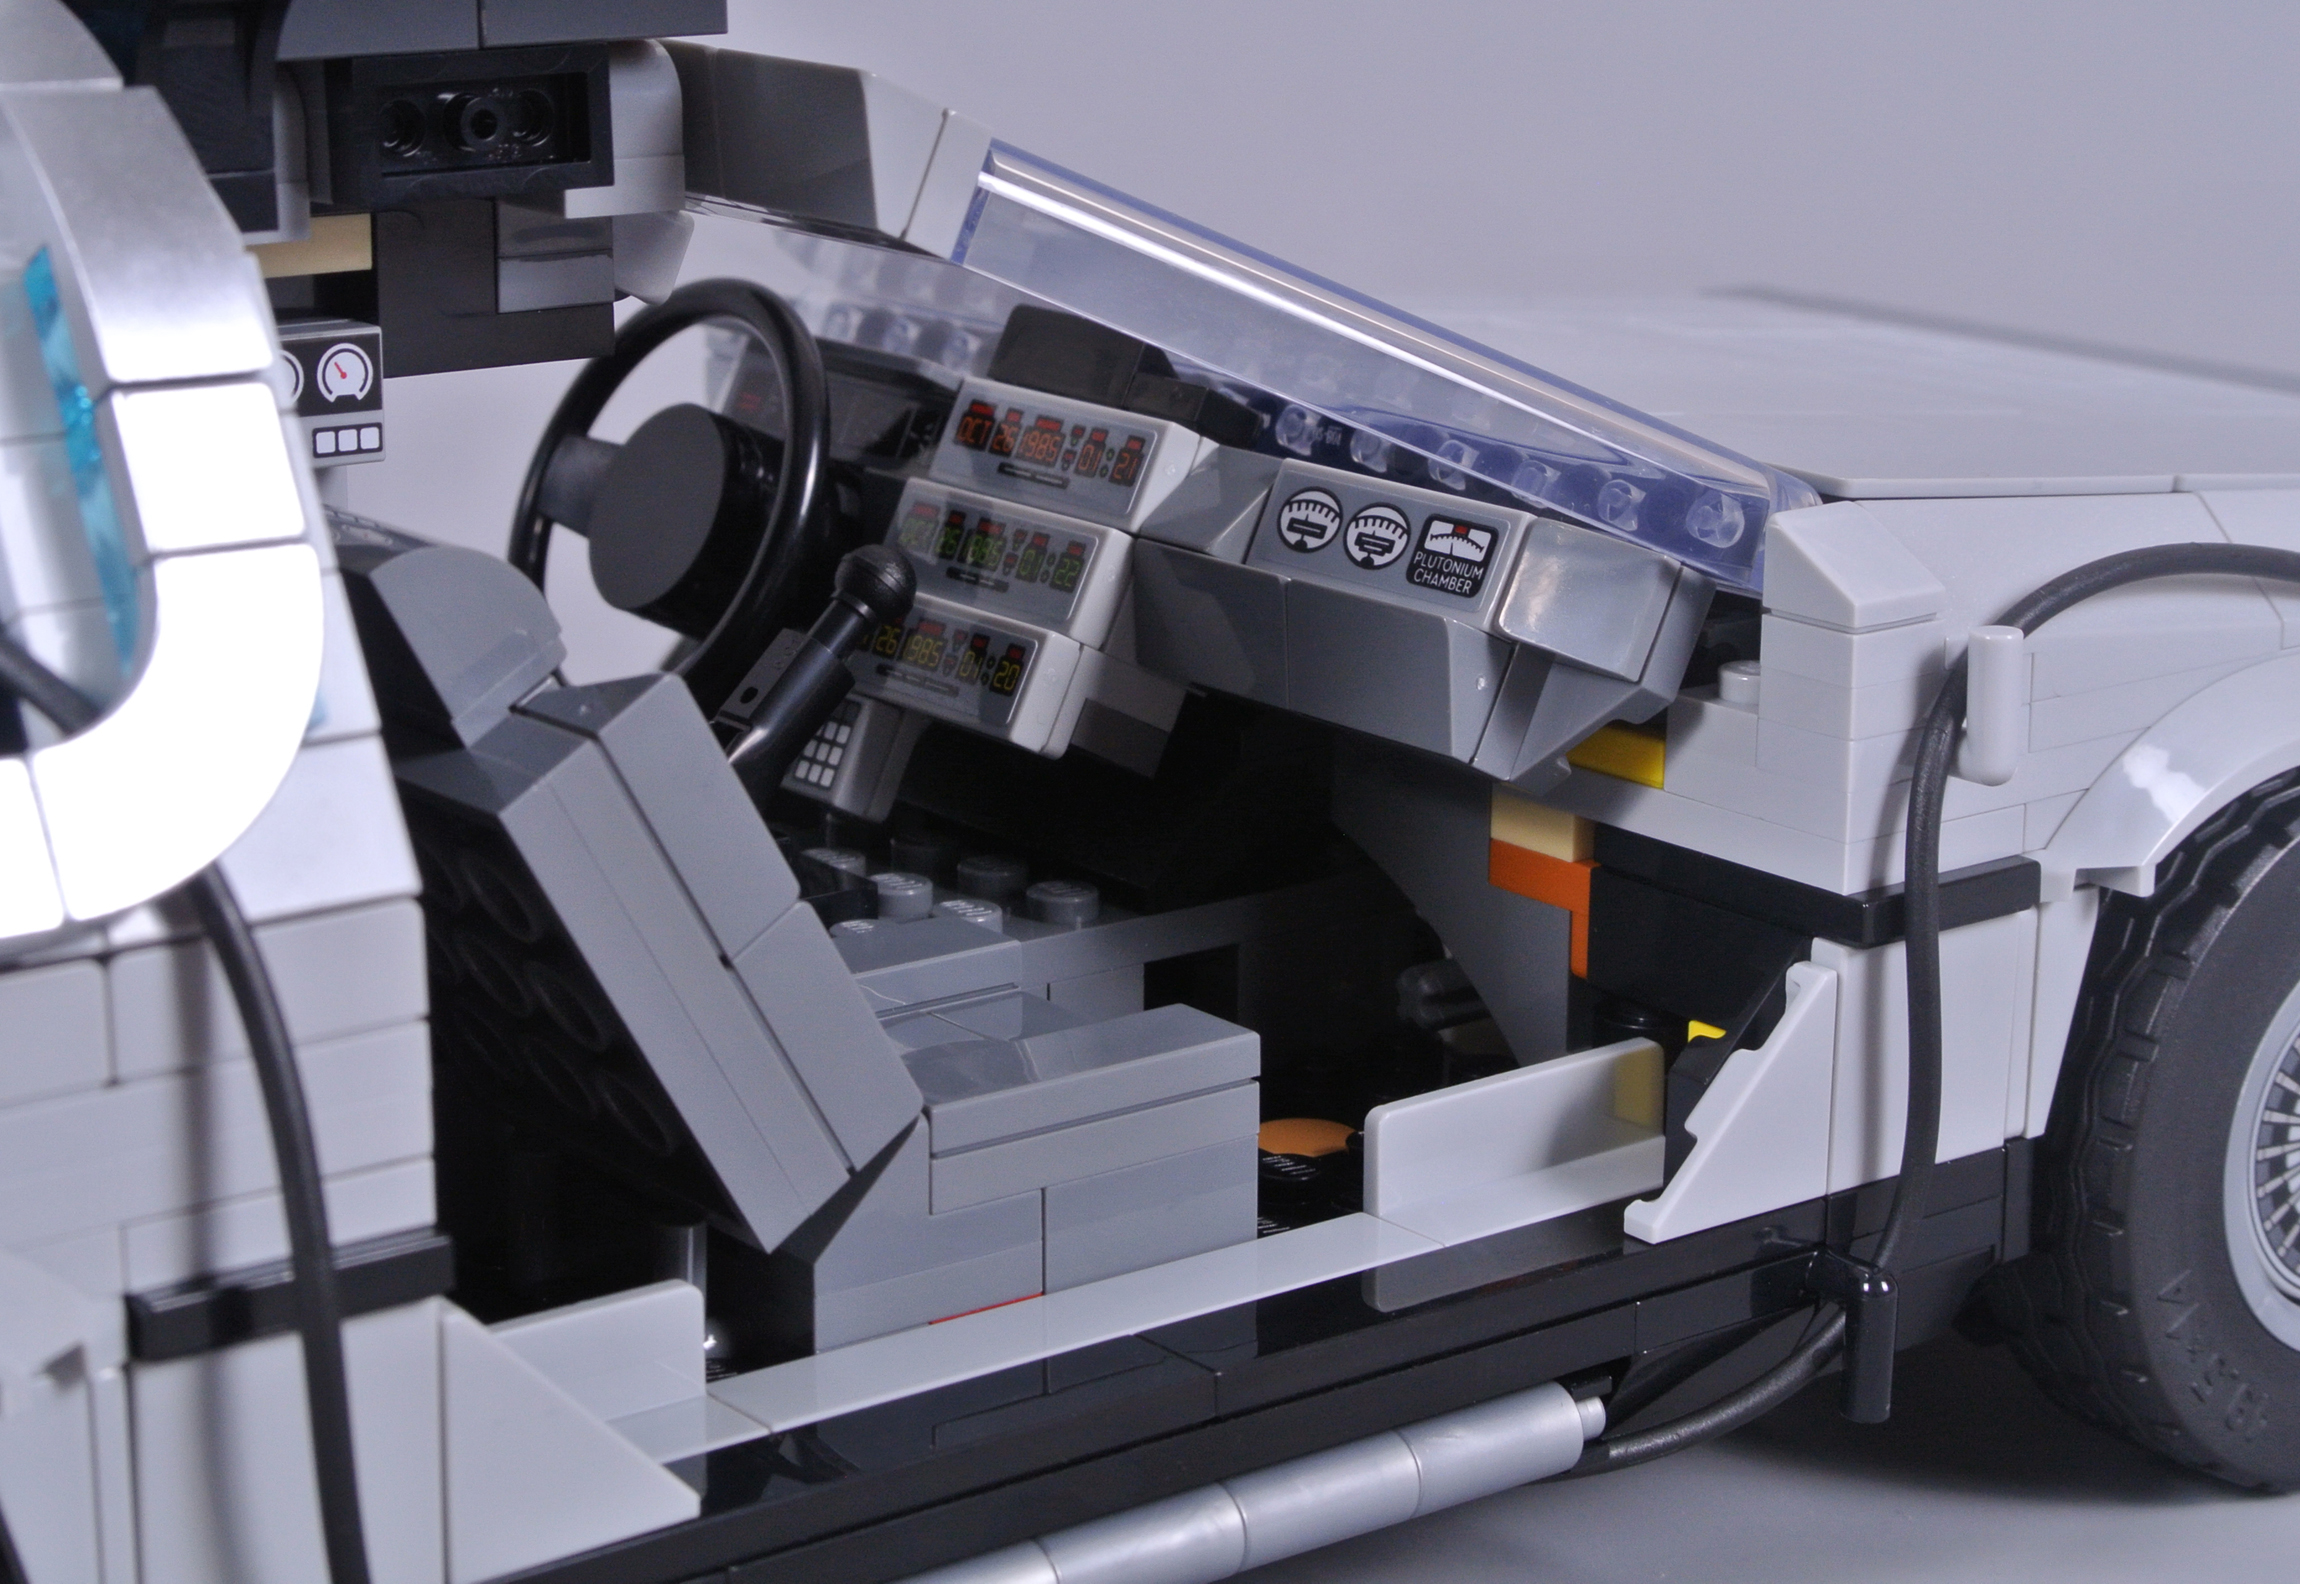 LEGO 10300 Back to the Future Time Machine review